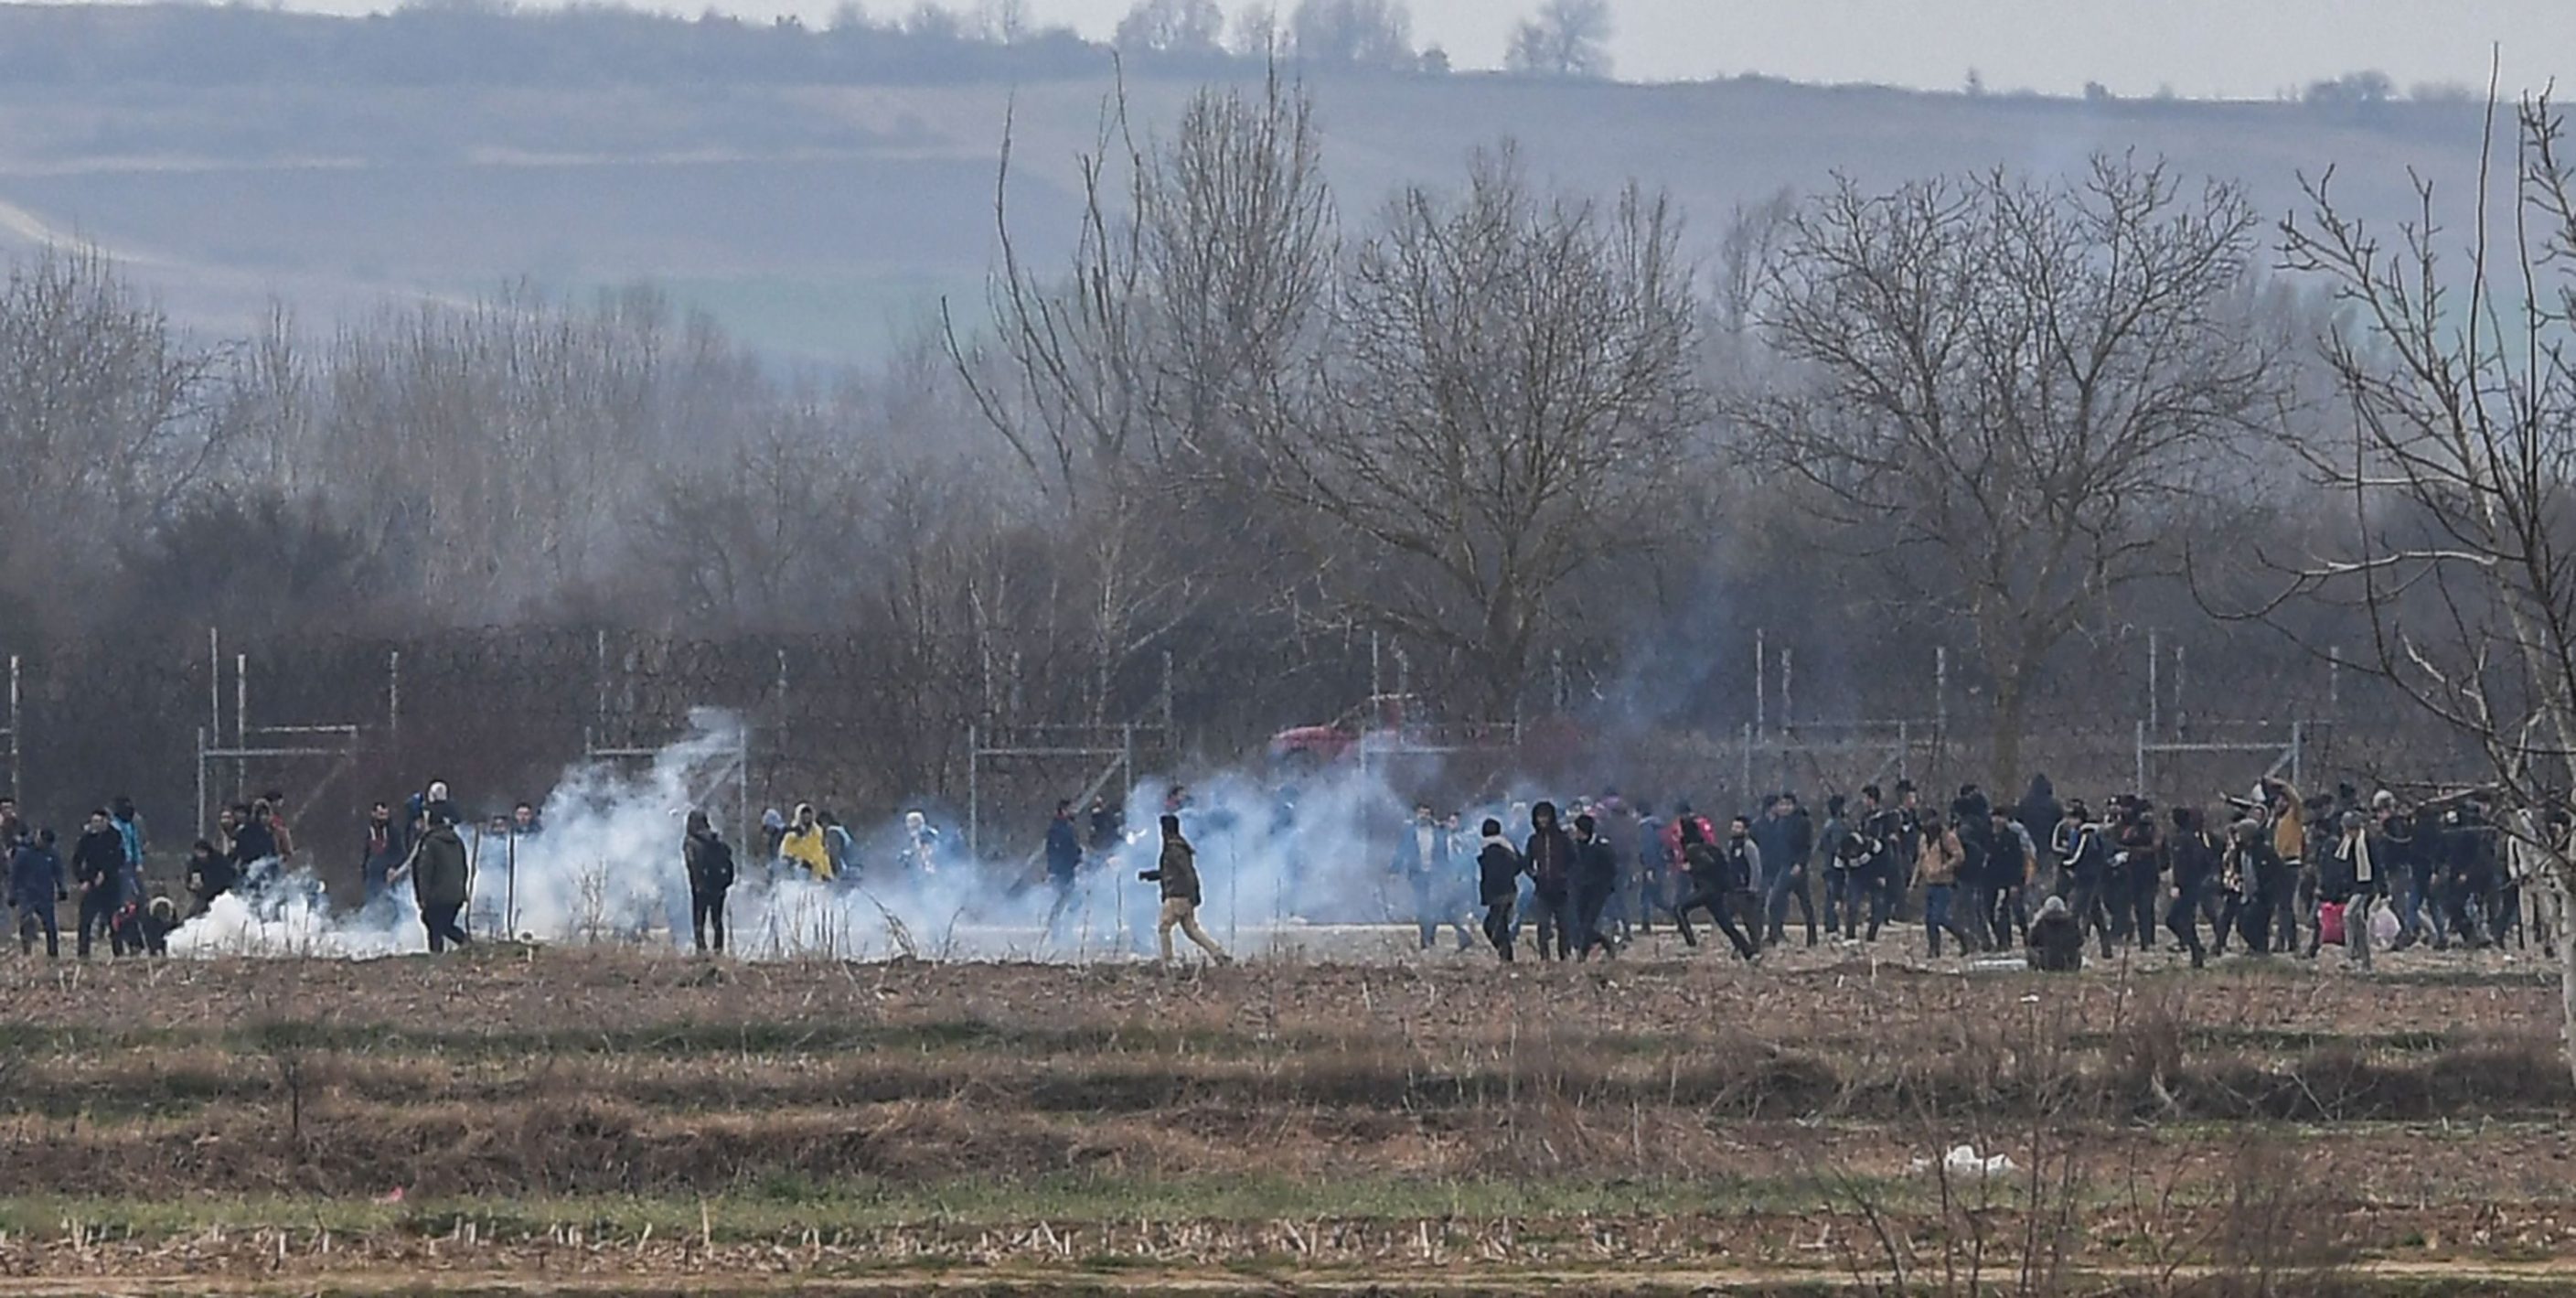 Migrants walk clash with Greek police as they resumed efforts to enter europe next to the fences near Pazarkule border gate in Edirne as Greek Police use tear gas and guns on March 4, 2020. - Migrants and refugees clashed with Greek police on the Turkish border on March 4, 2020, as they resumed efforts to enter Europe, leaving at least one person injured according to AFP correspondents. (Photo by Ozan KOSE / AFP)